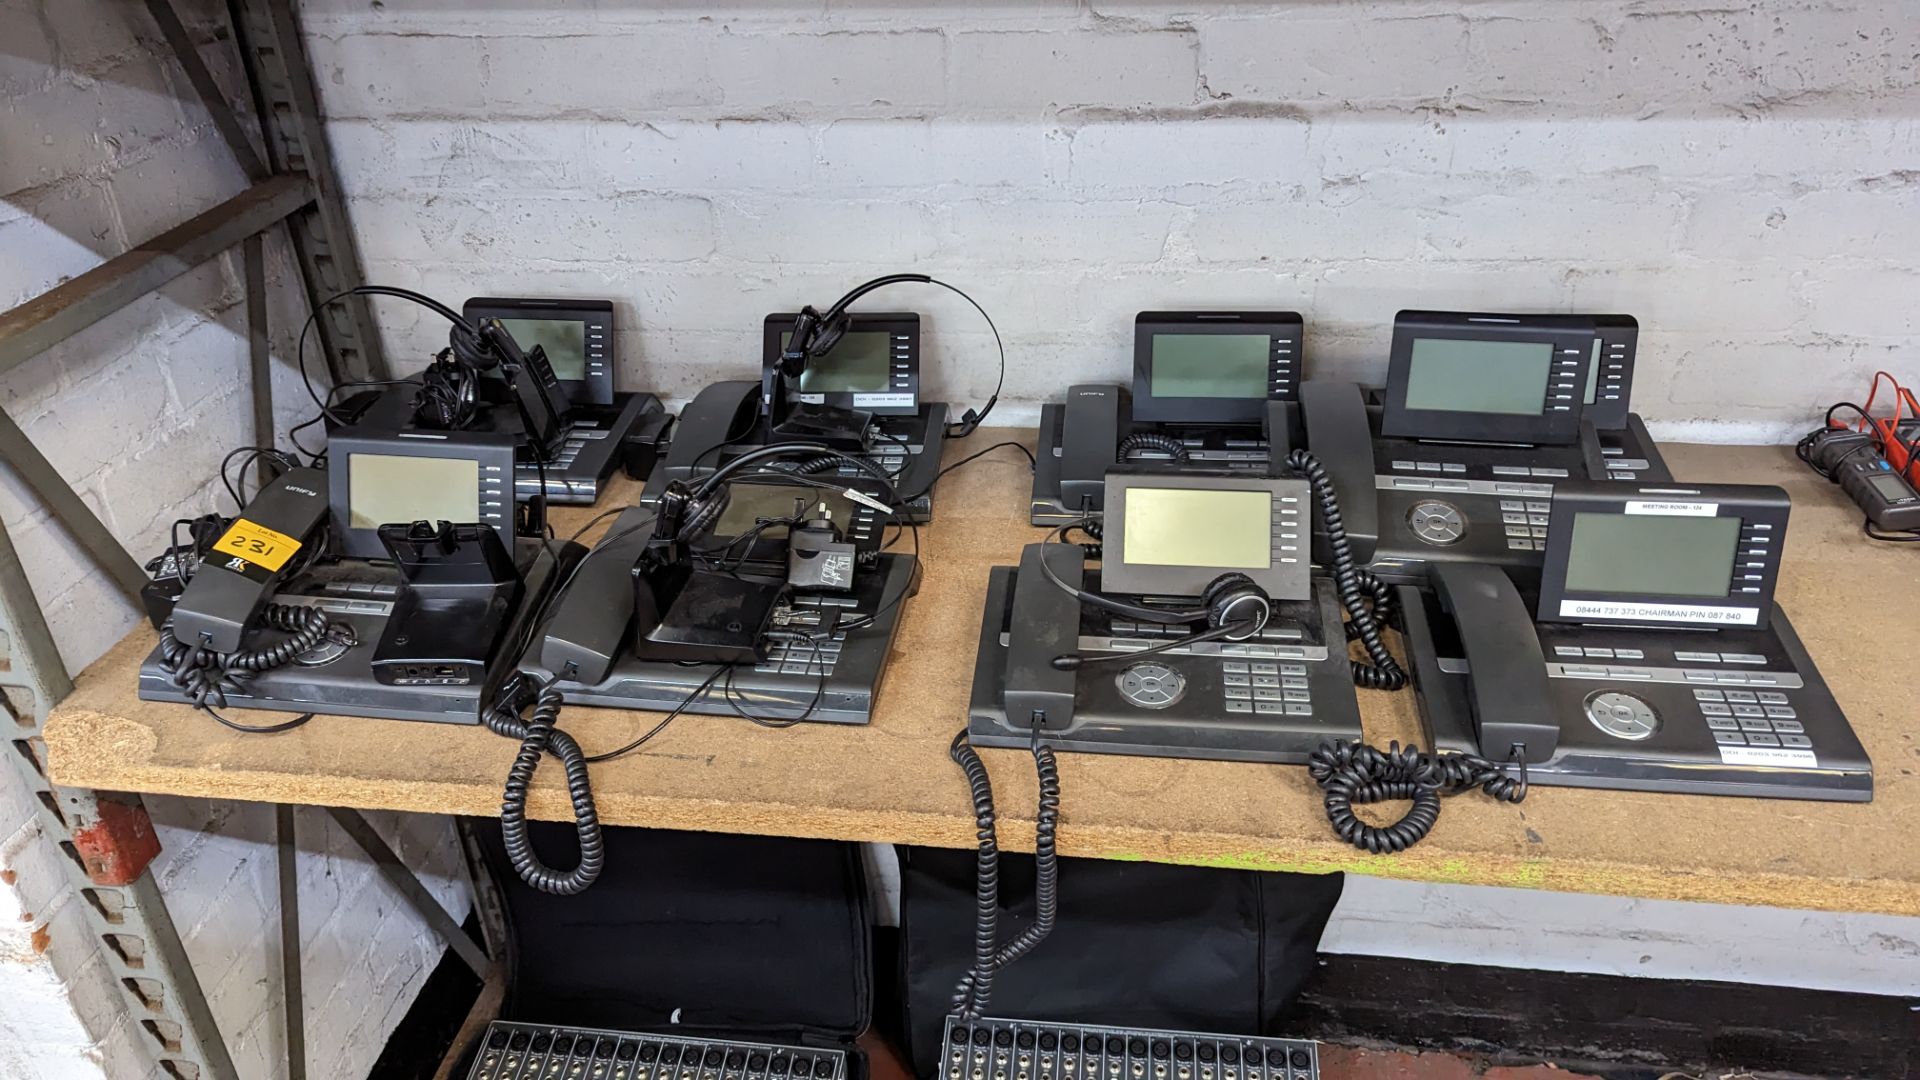 9 off Siemans Openstage 40HFA telephone handsets with digital displays, some of which include a head